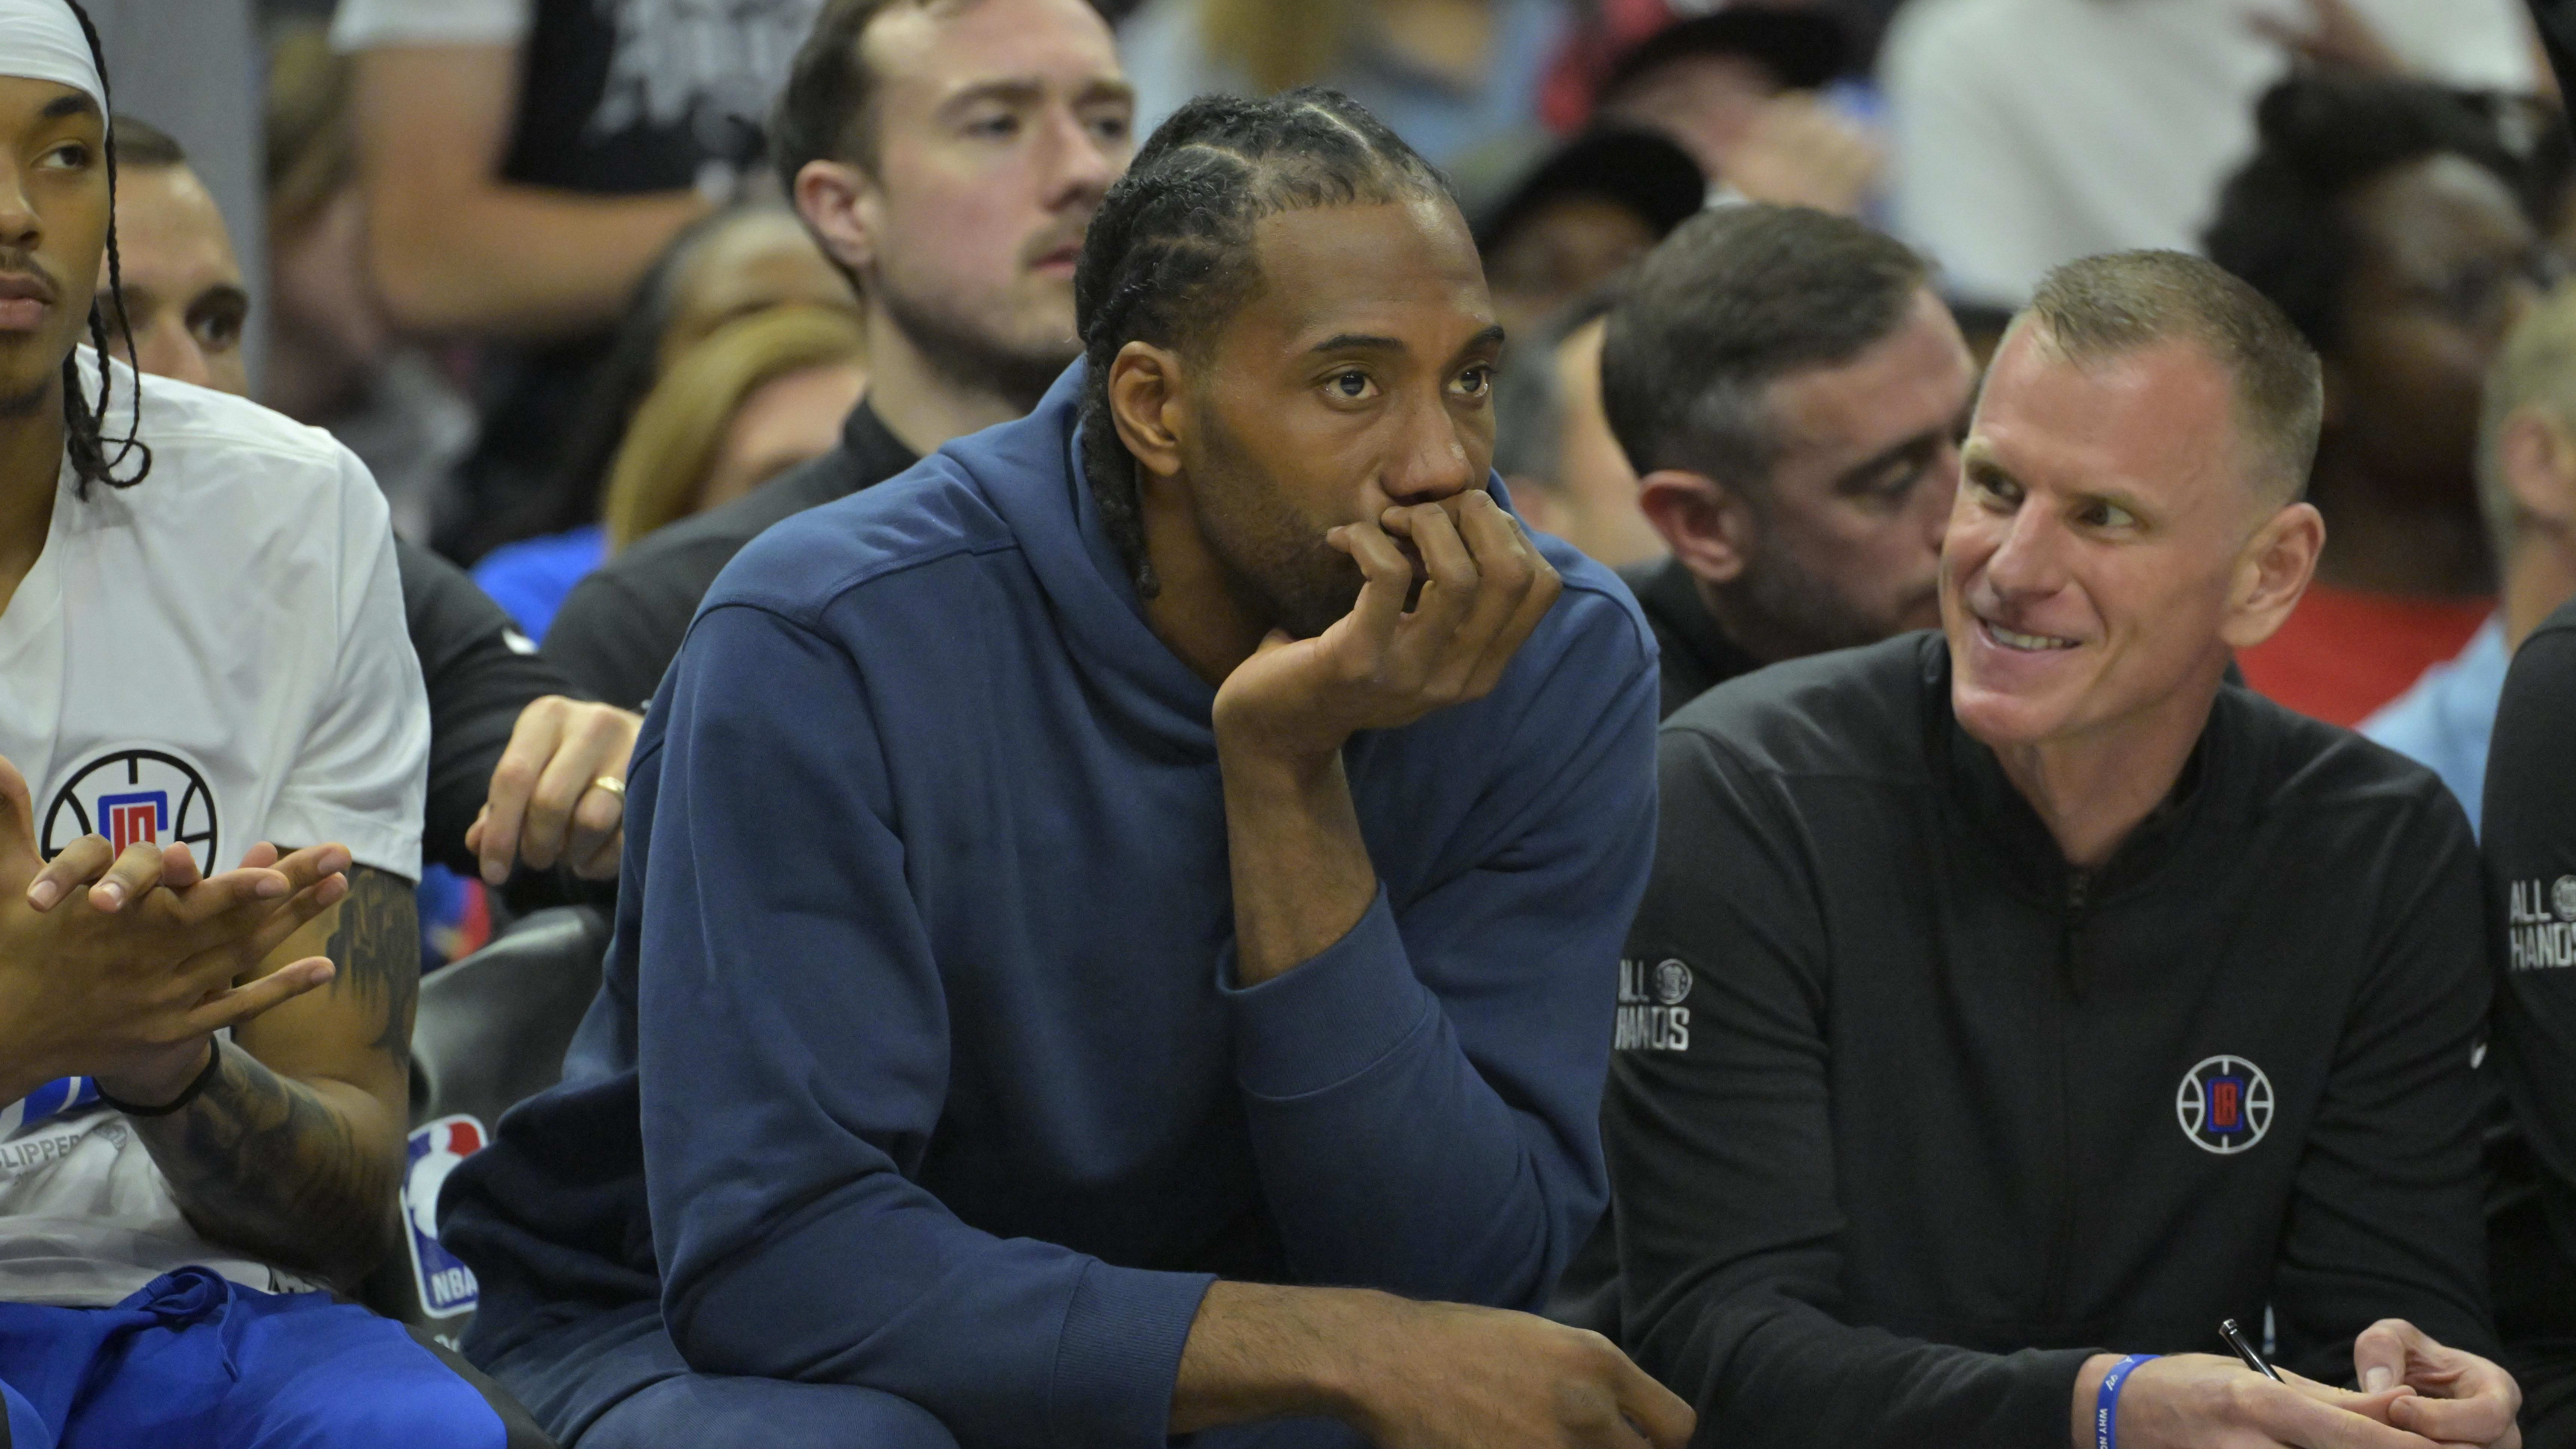 Kawhi Leonard openly discusses his injury and health concerns